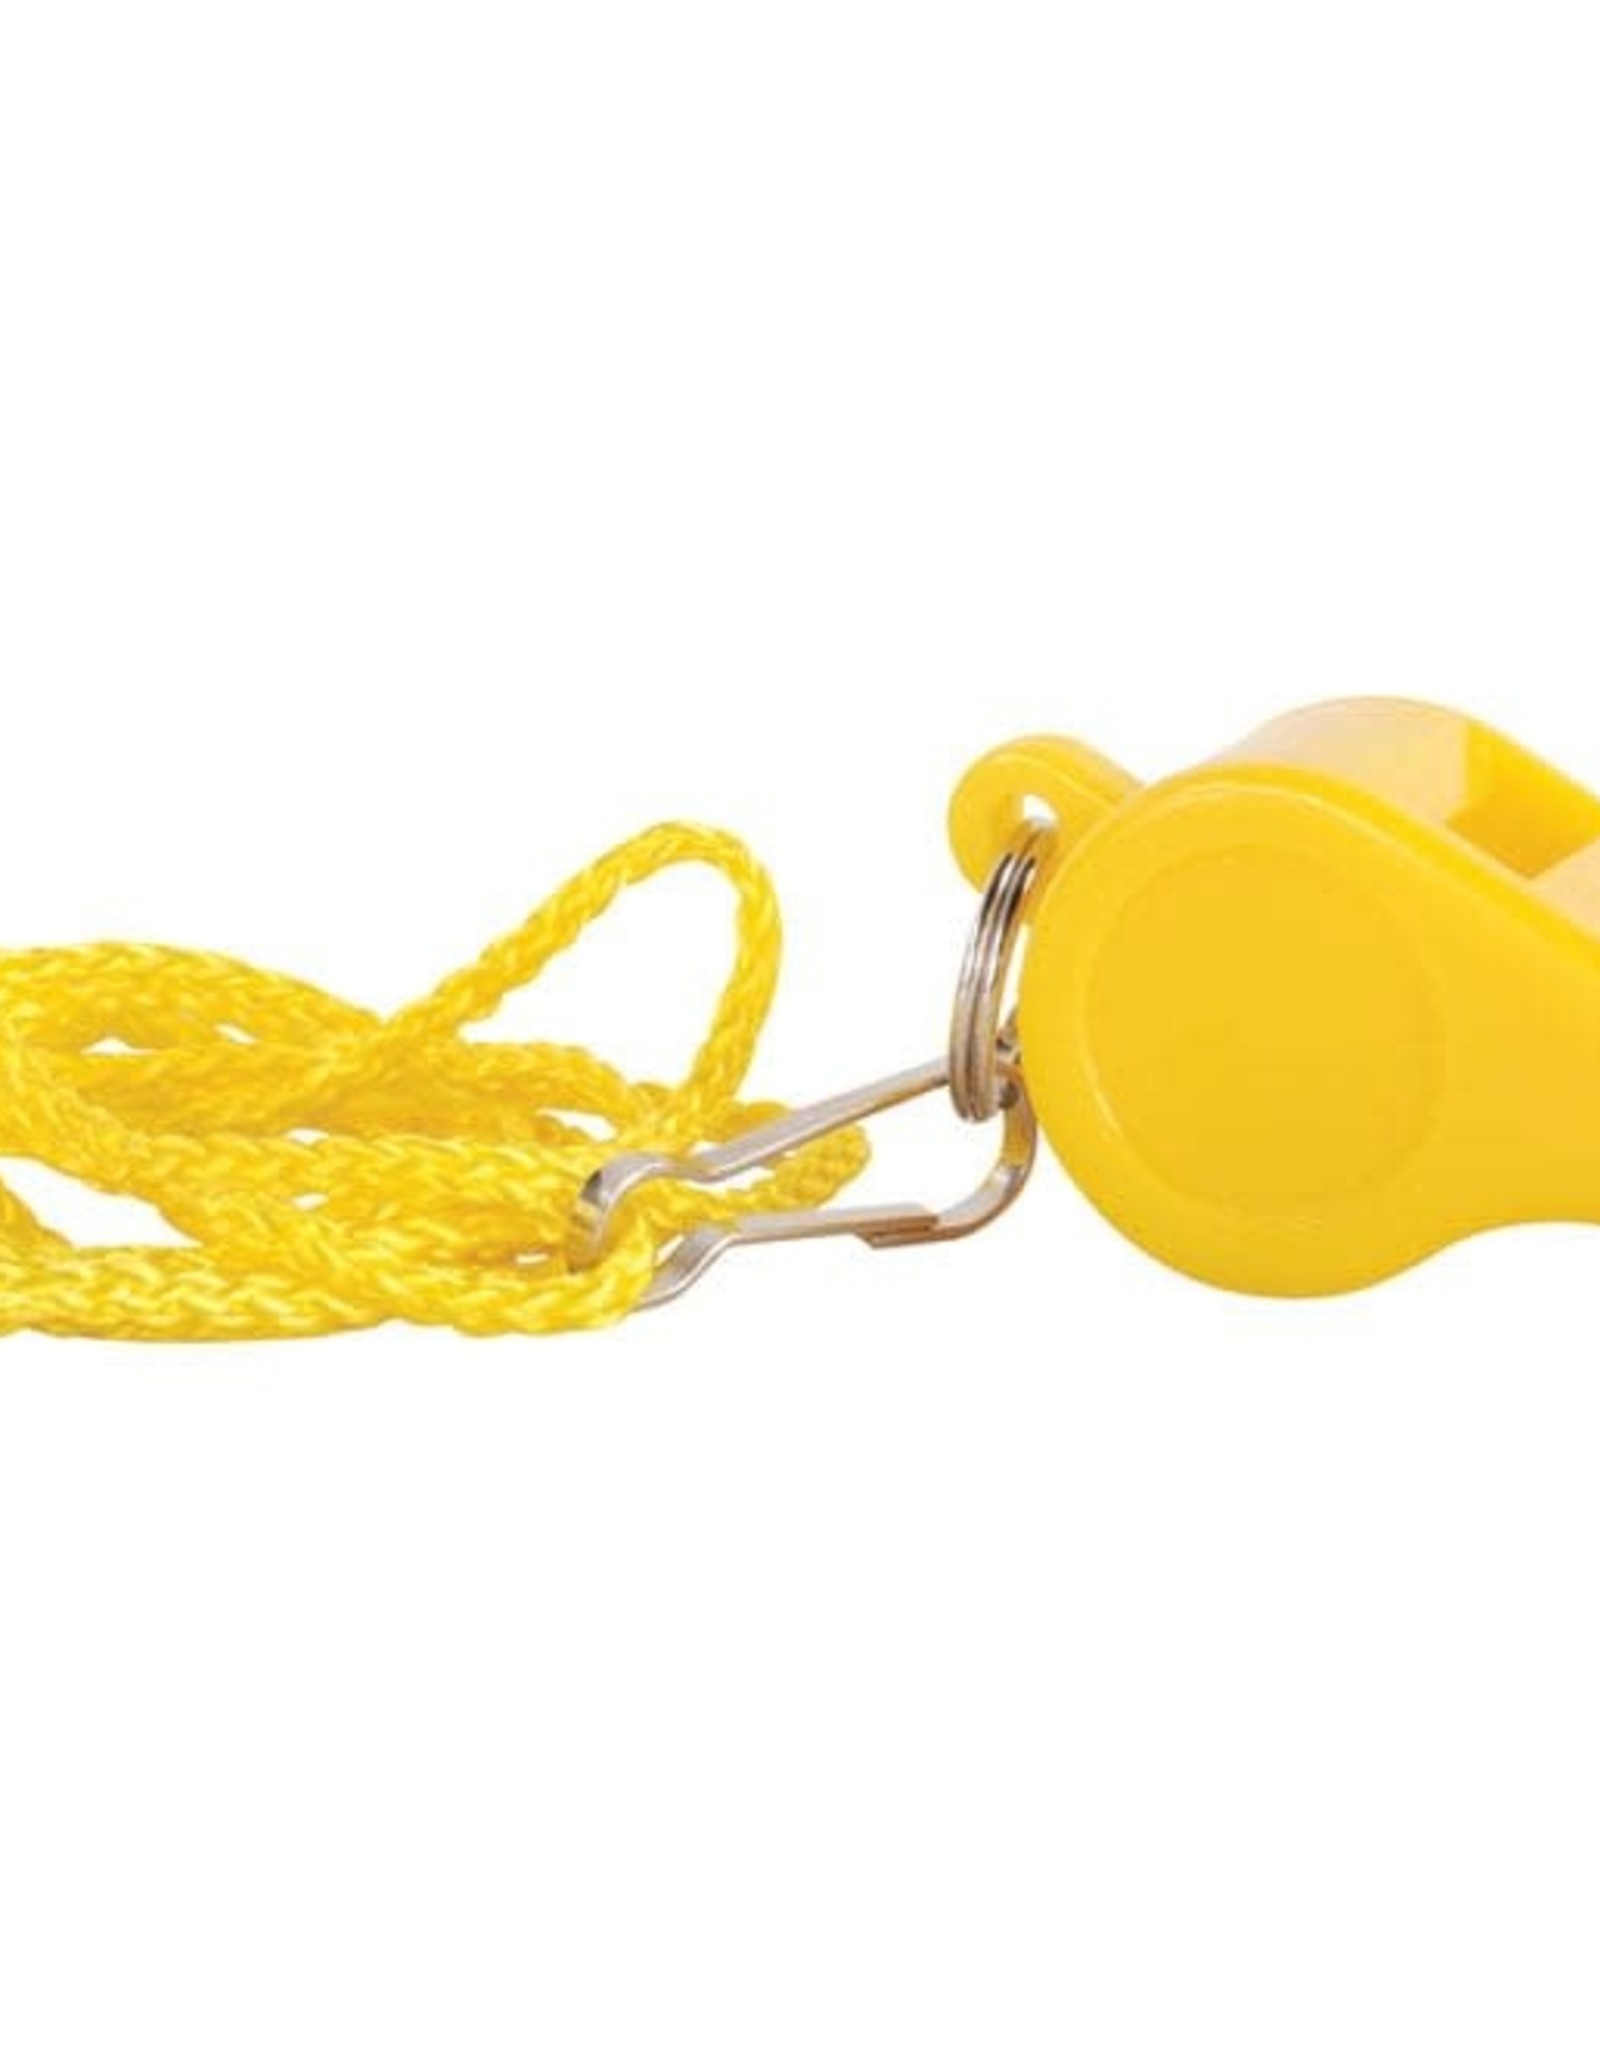 Coghlan’s Plastic Safety Whistle